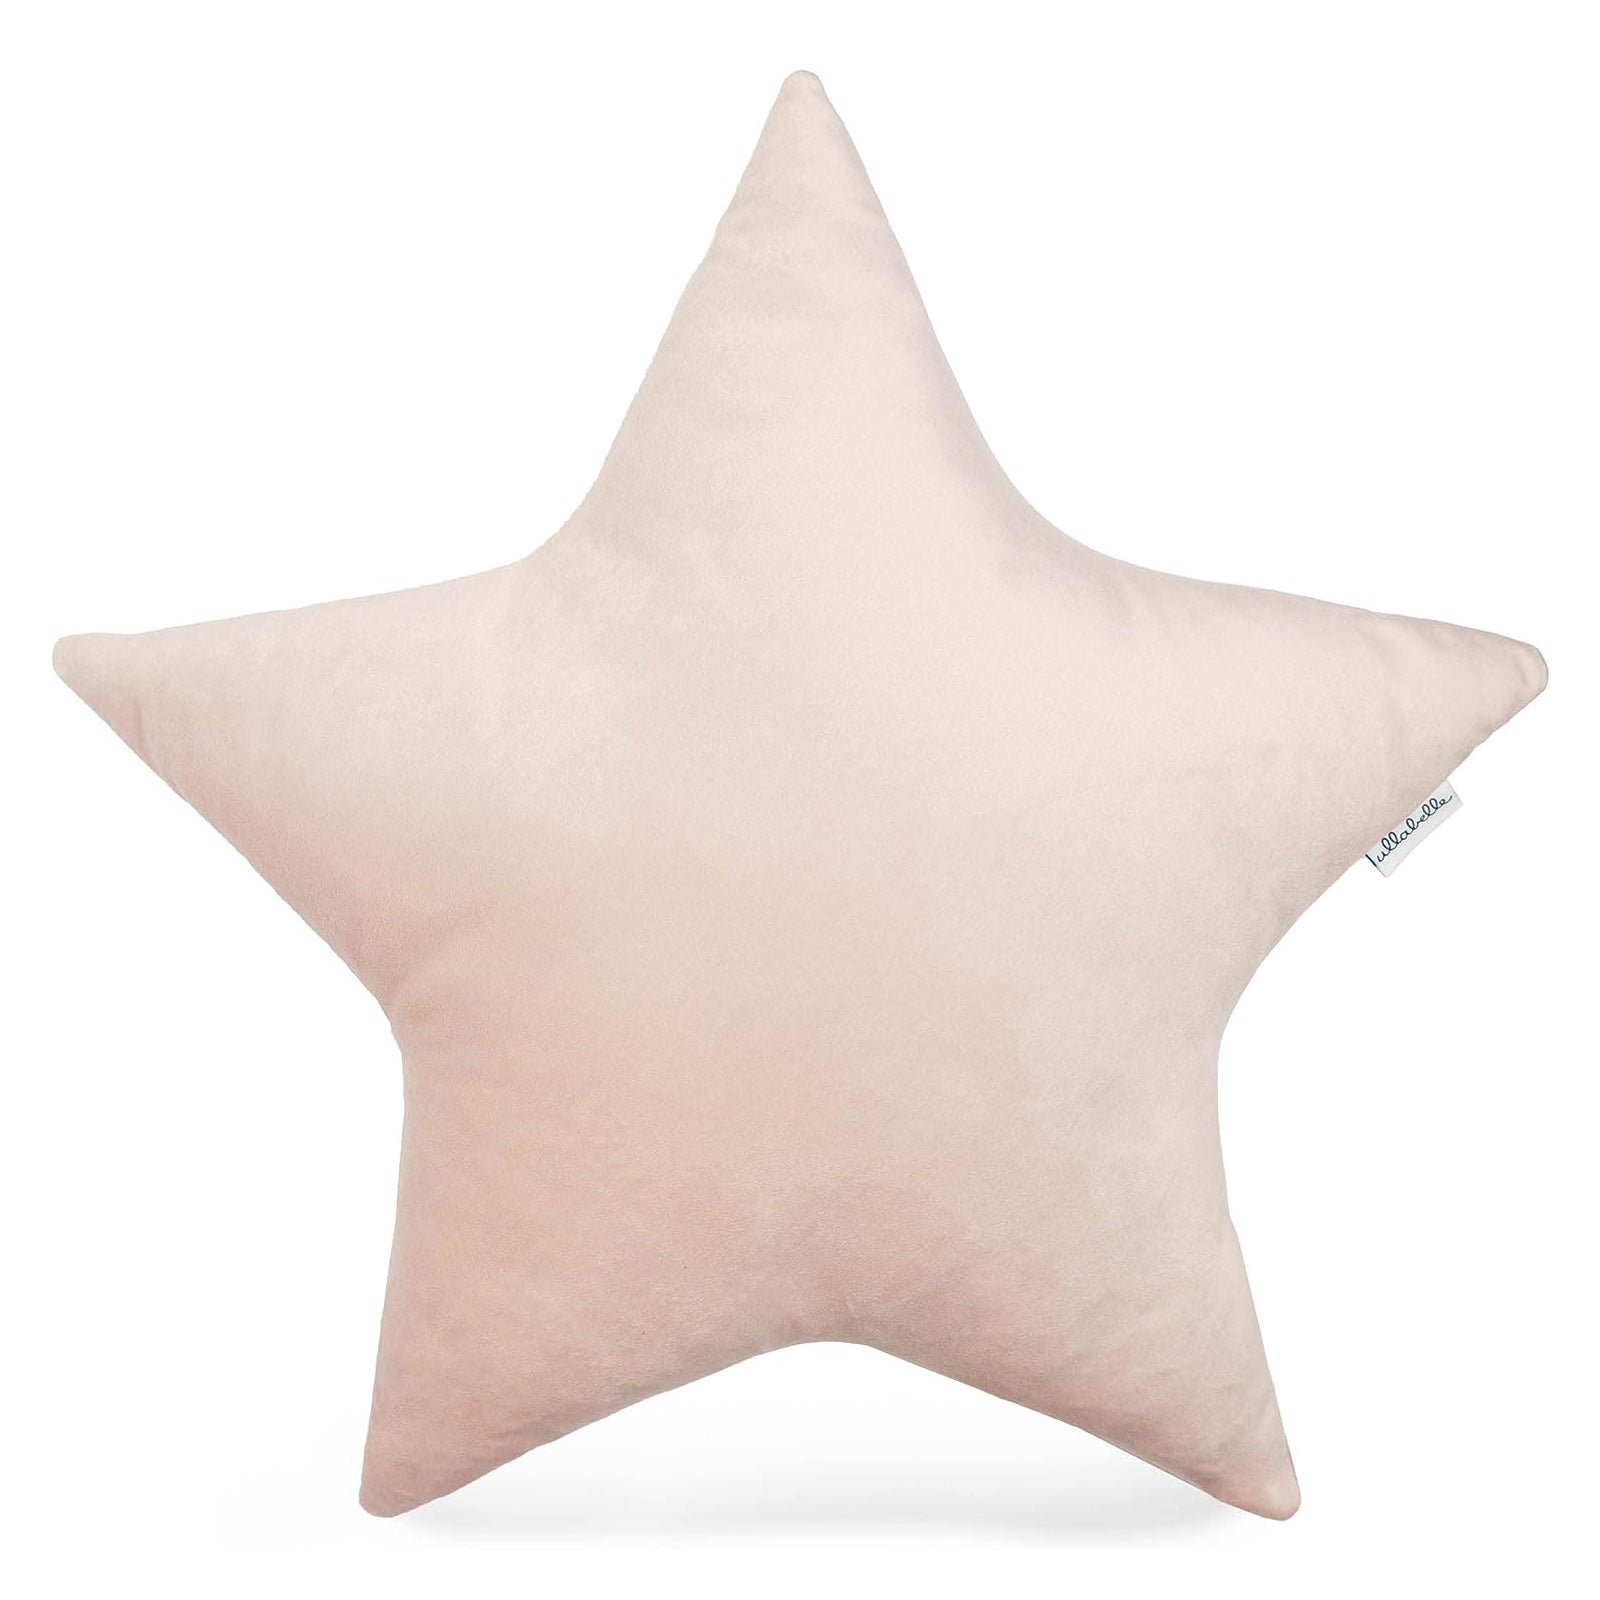 Wish Upon a Star Pillow (Blue)